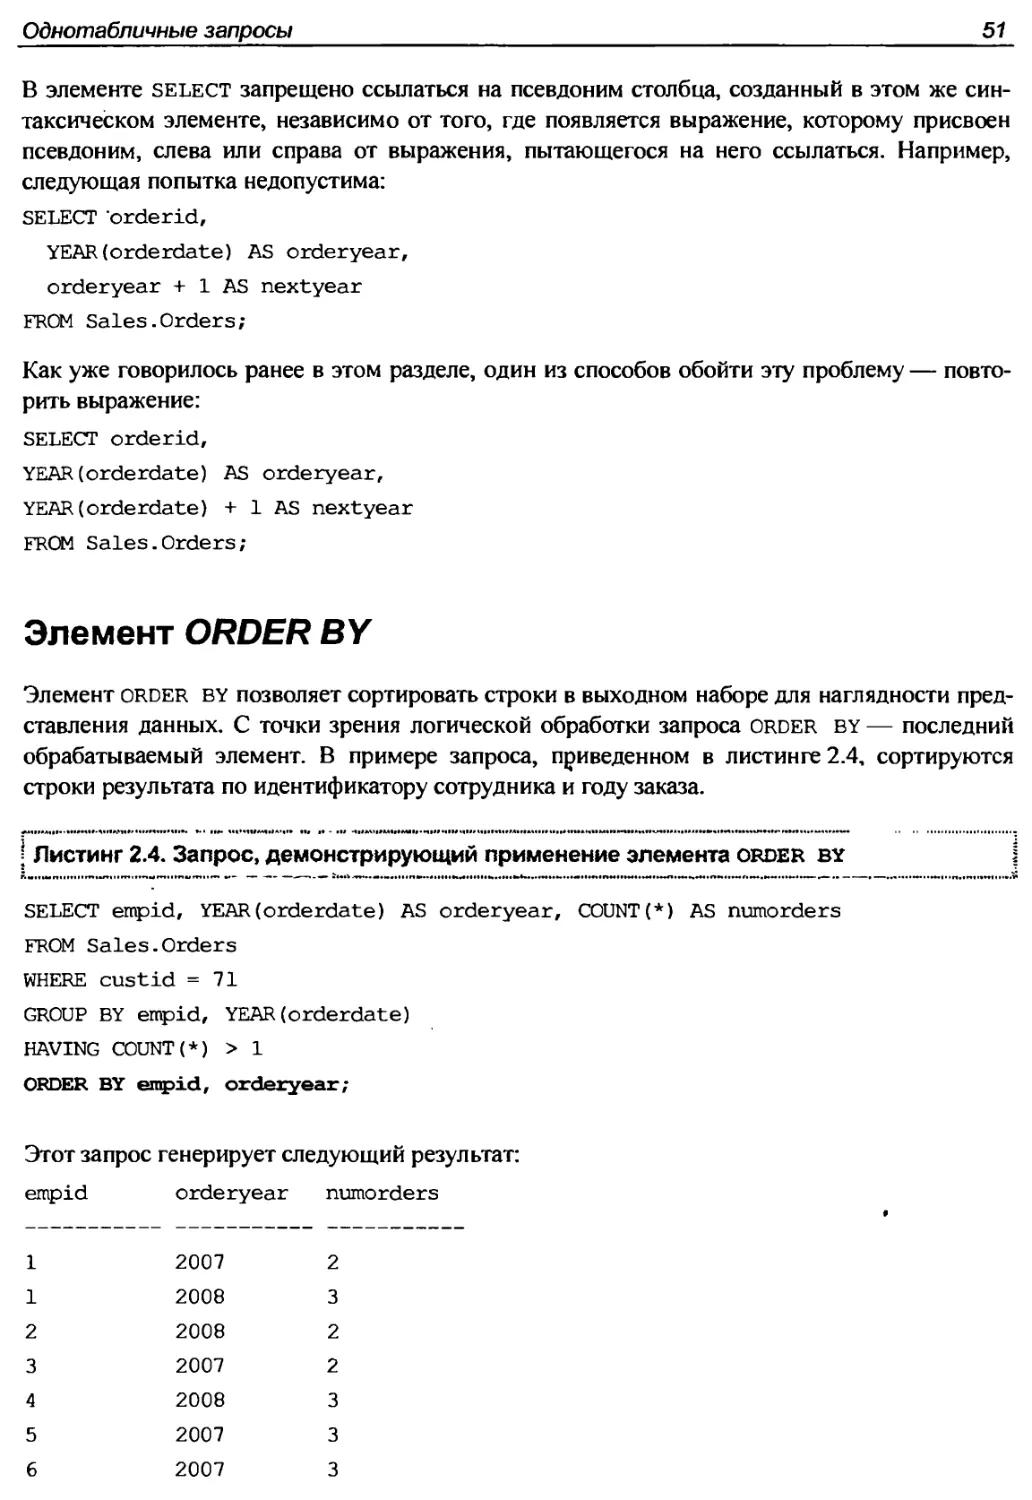 Элемент ORDER BY